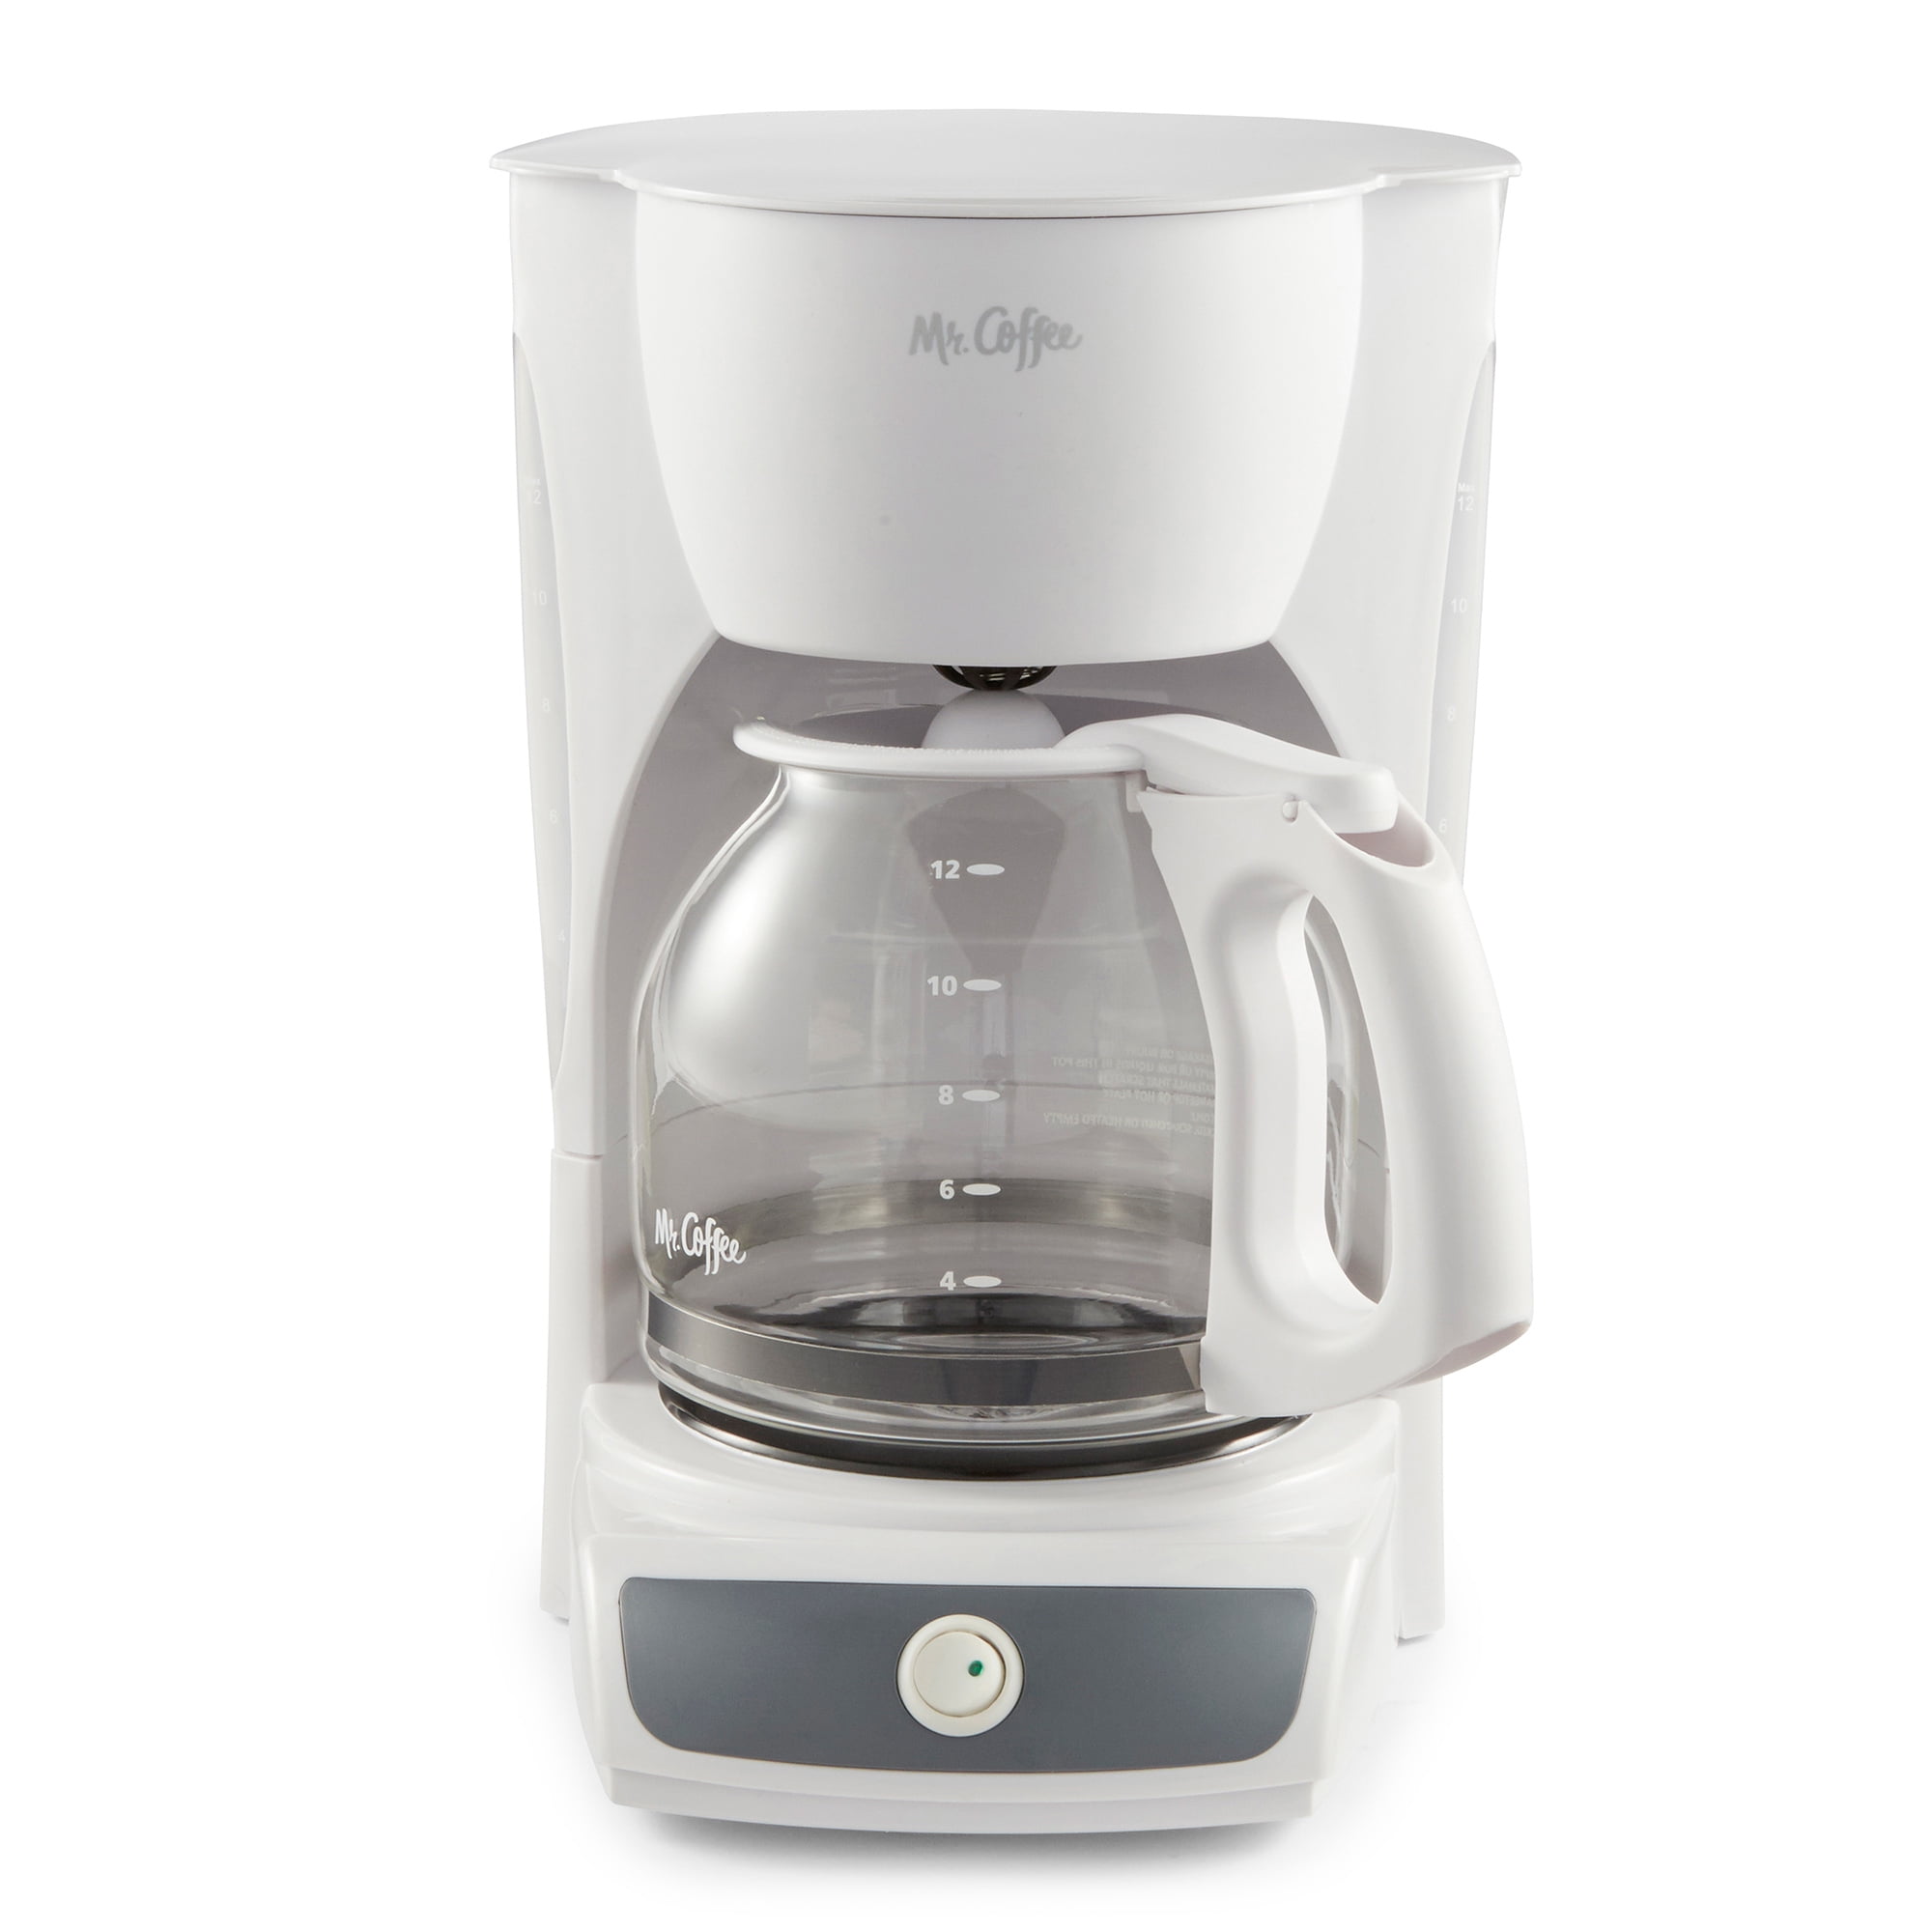 Mr Coffee 12 Cup Switch White Coffee Maker 2176664, 1 - Kroger